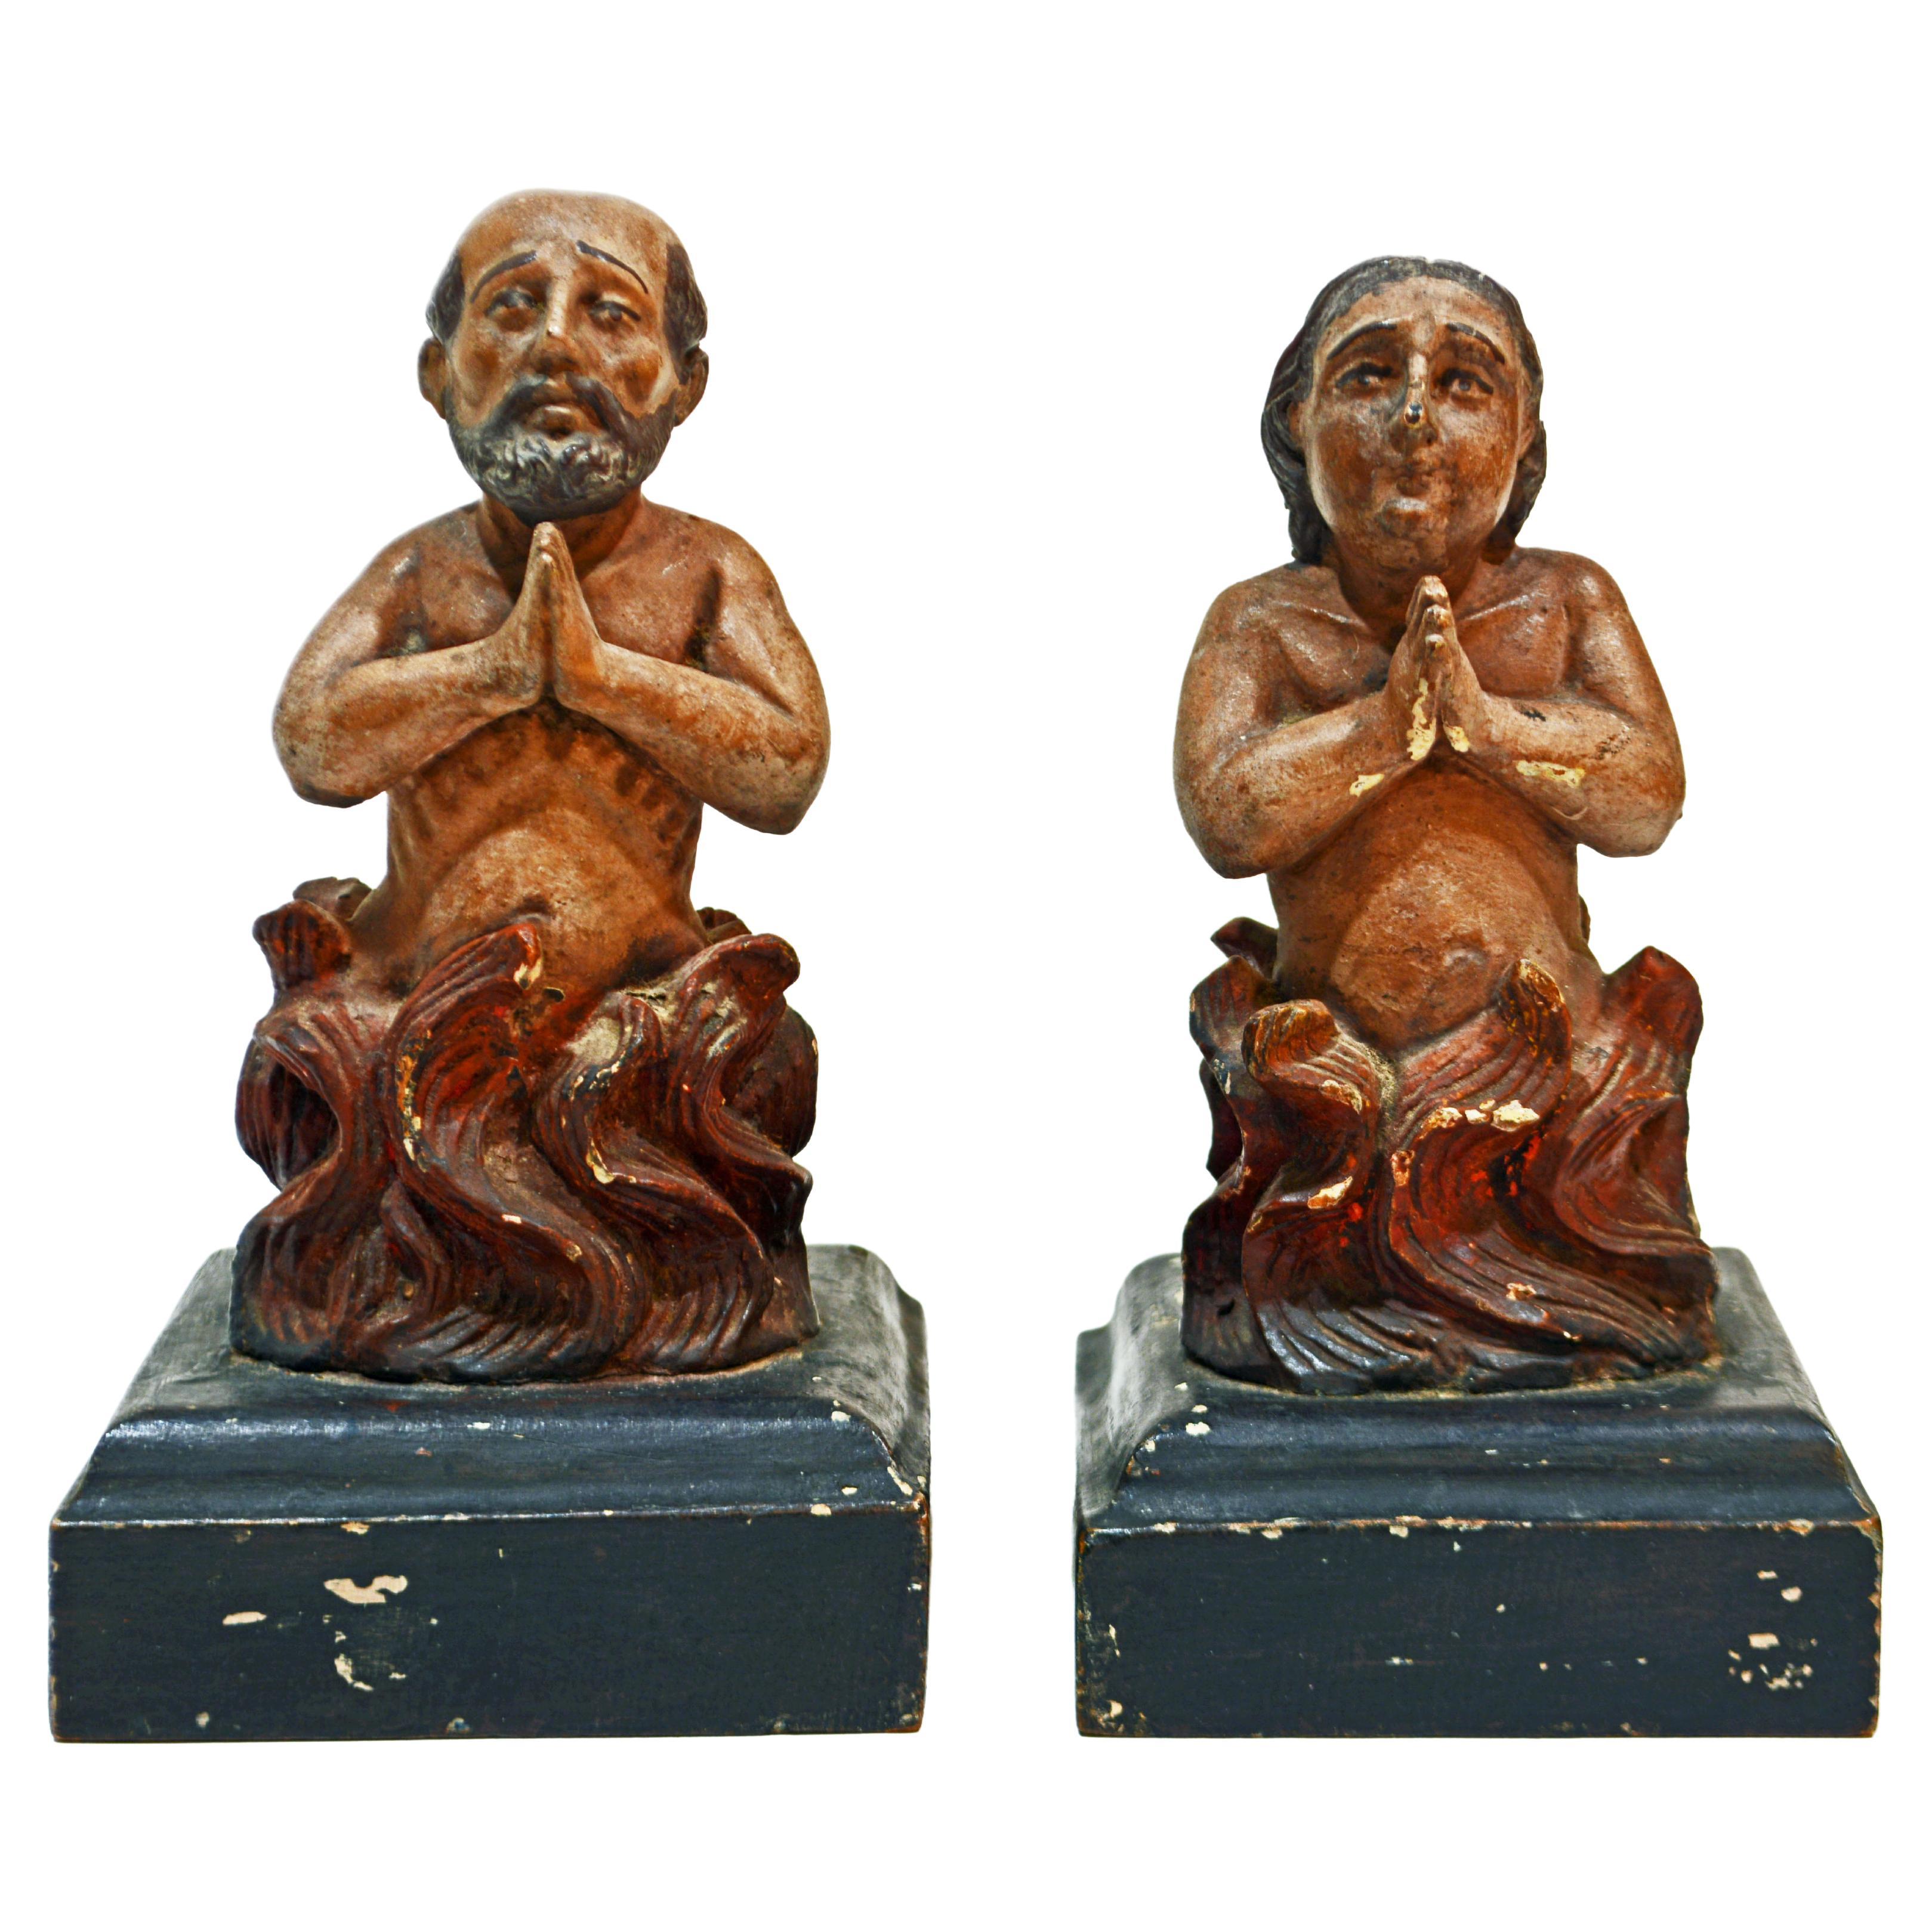 Pair of Early 19th C. Spanish Colonial Carved and Painted 'Anima Sola' Figures